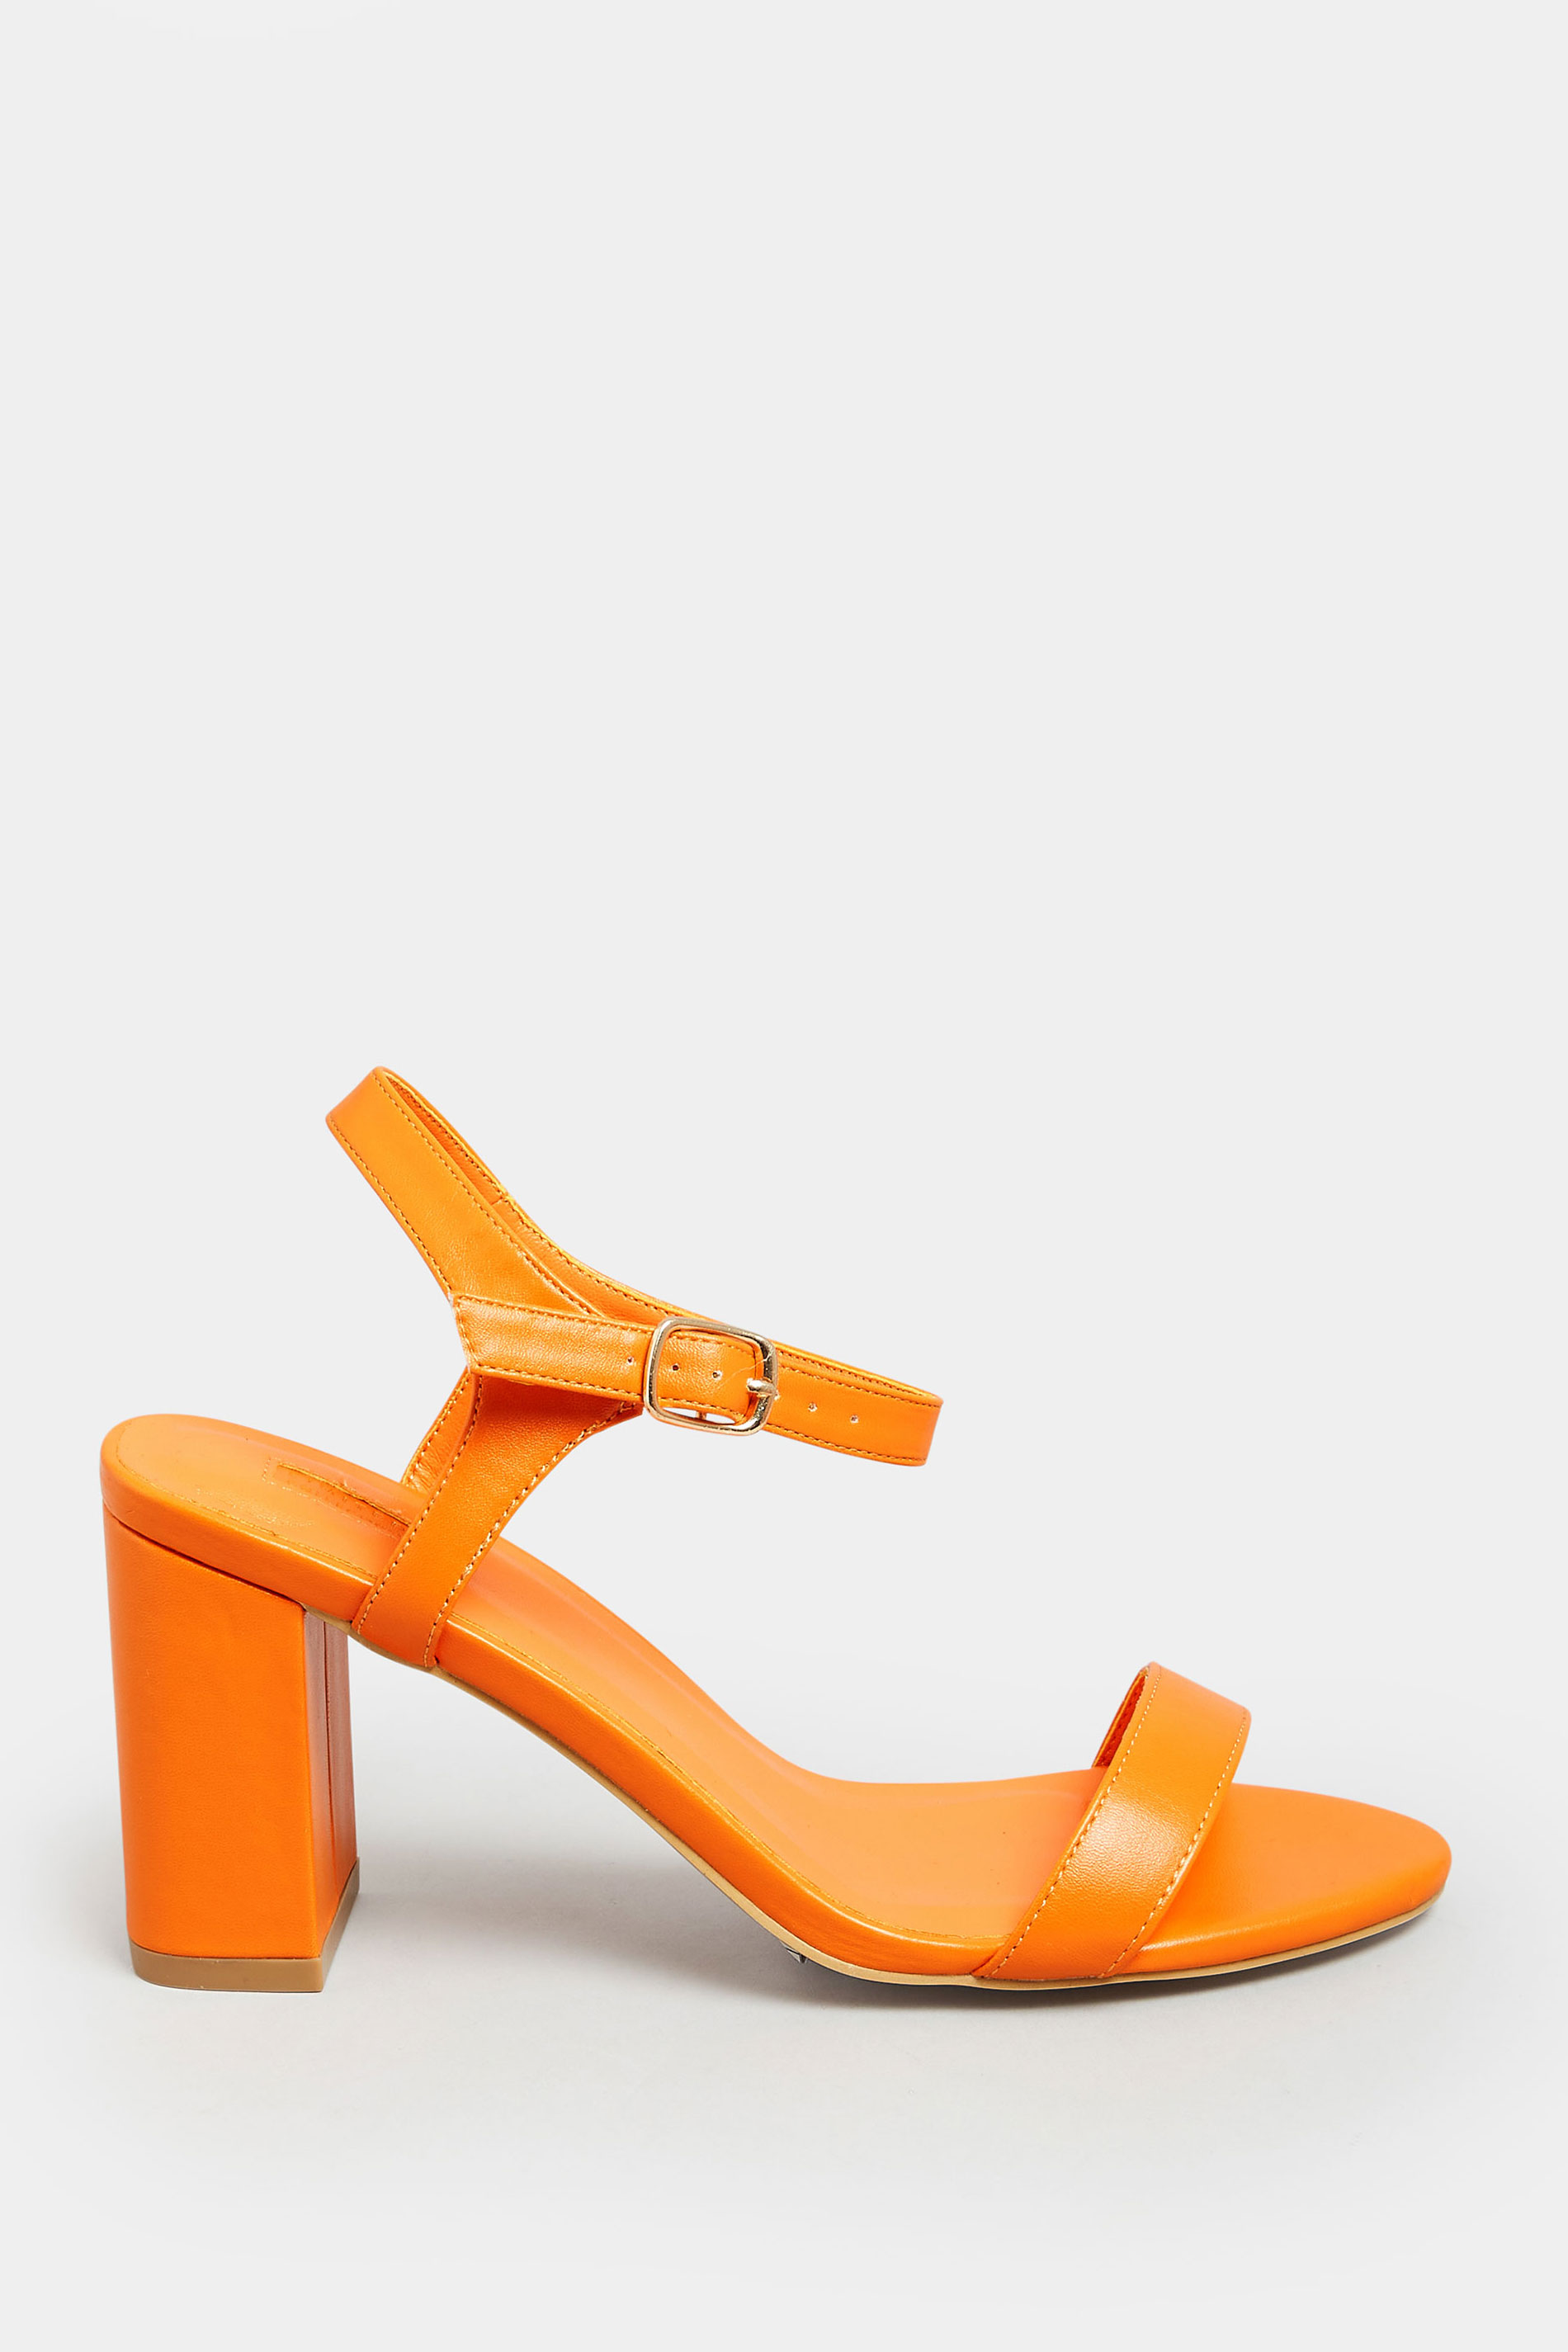 LIMITED COLLECTION Orange Block Heel Sandal In Wide E Fit & Extra Wide Fit | Yours Clothing 3